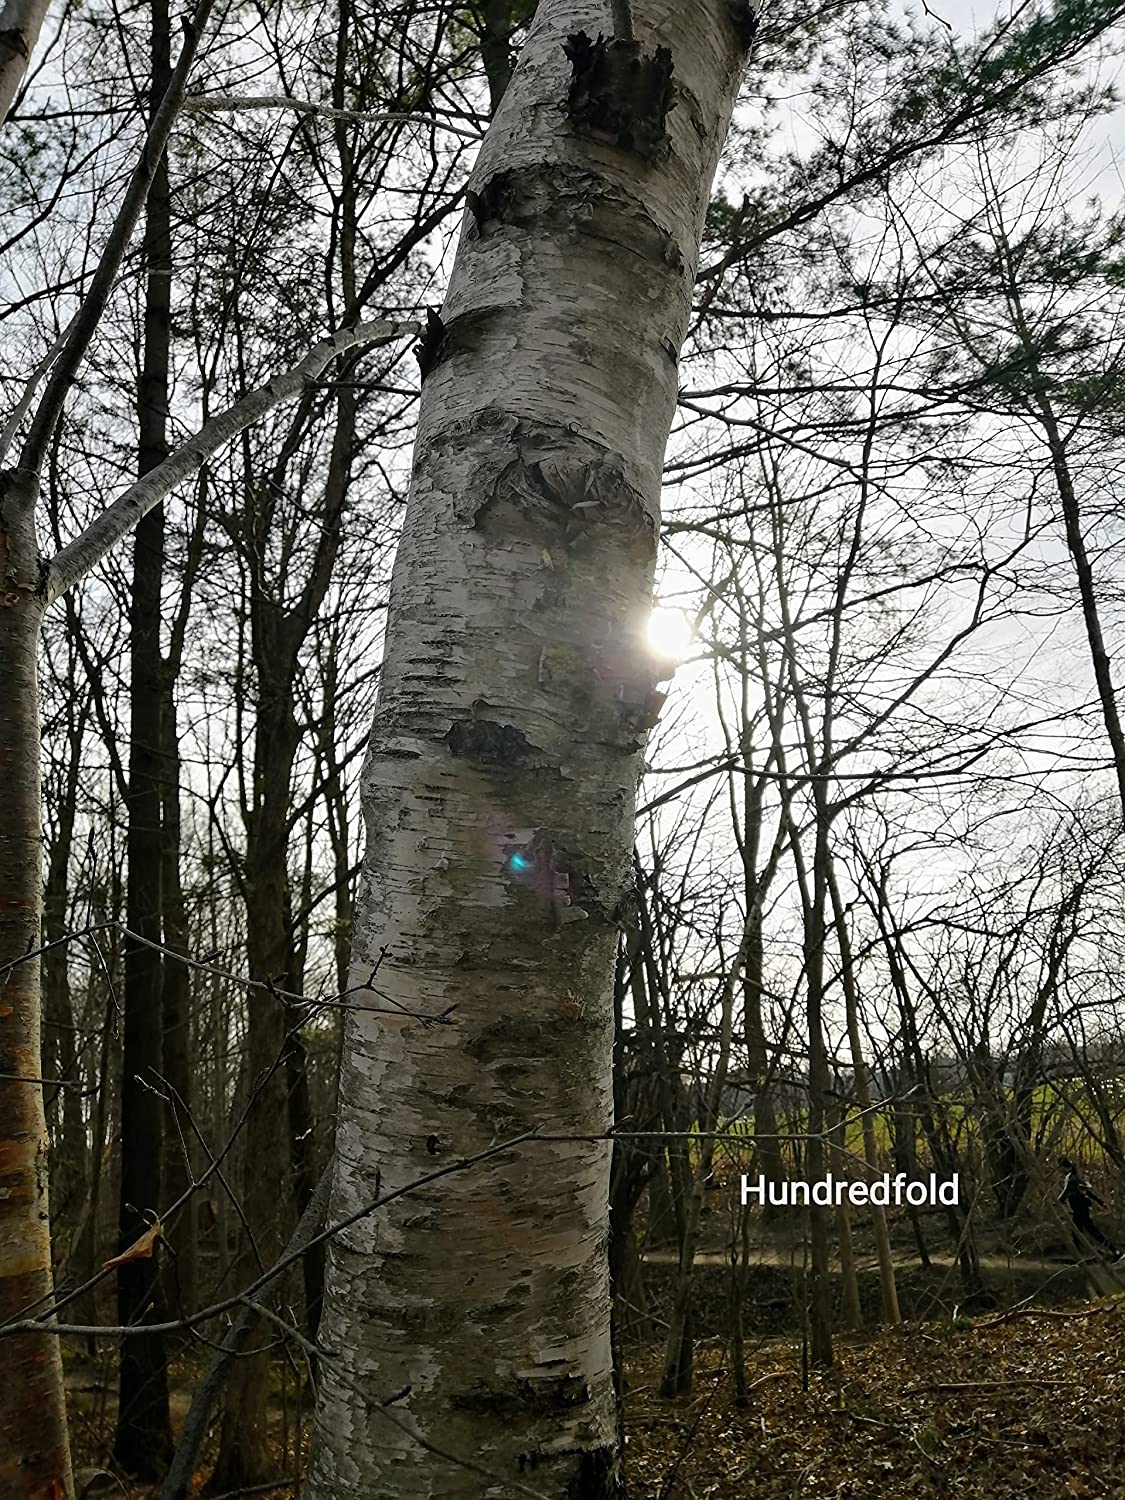 Paper Birch 50 Seeds - Betula papyrifera American White Birch, Canoe Birch Native Tree in Canada and USA, Excellent for Landscaping and Reforestation